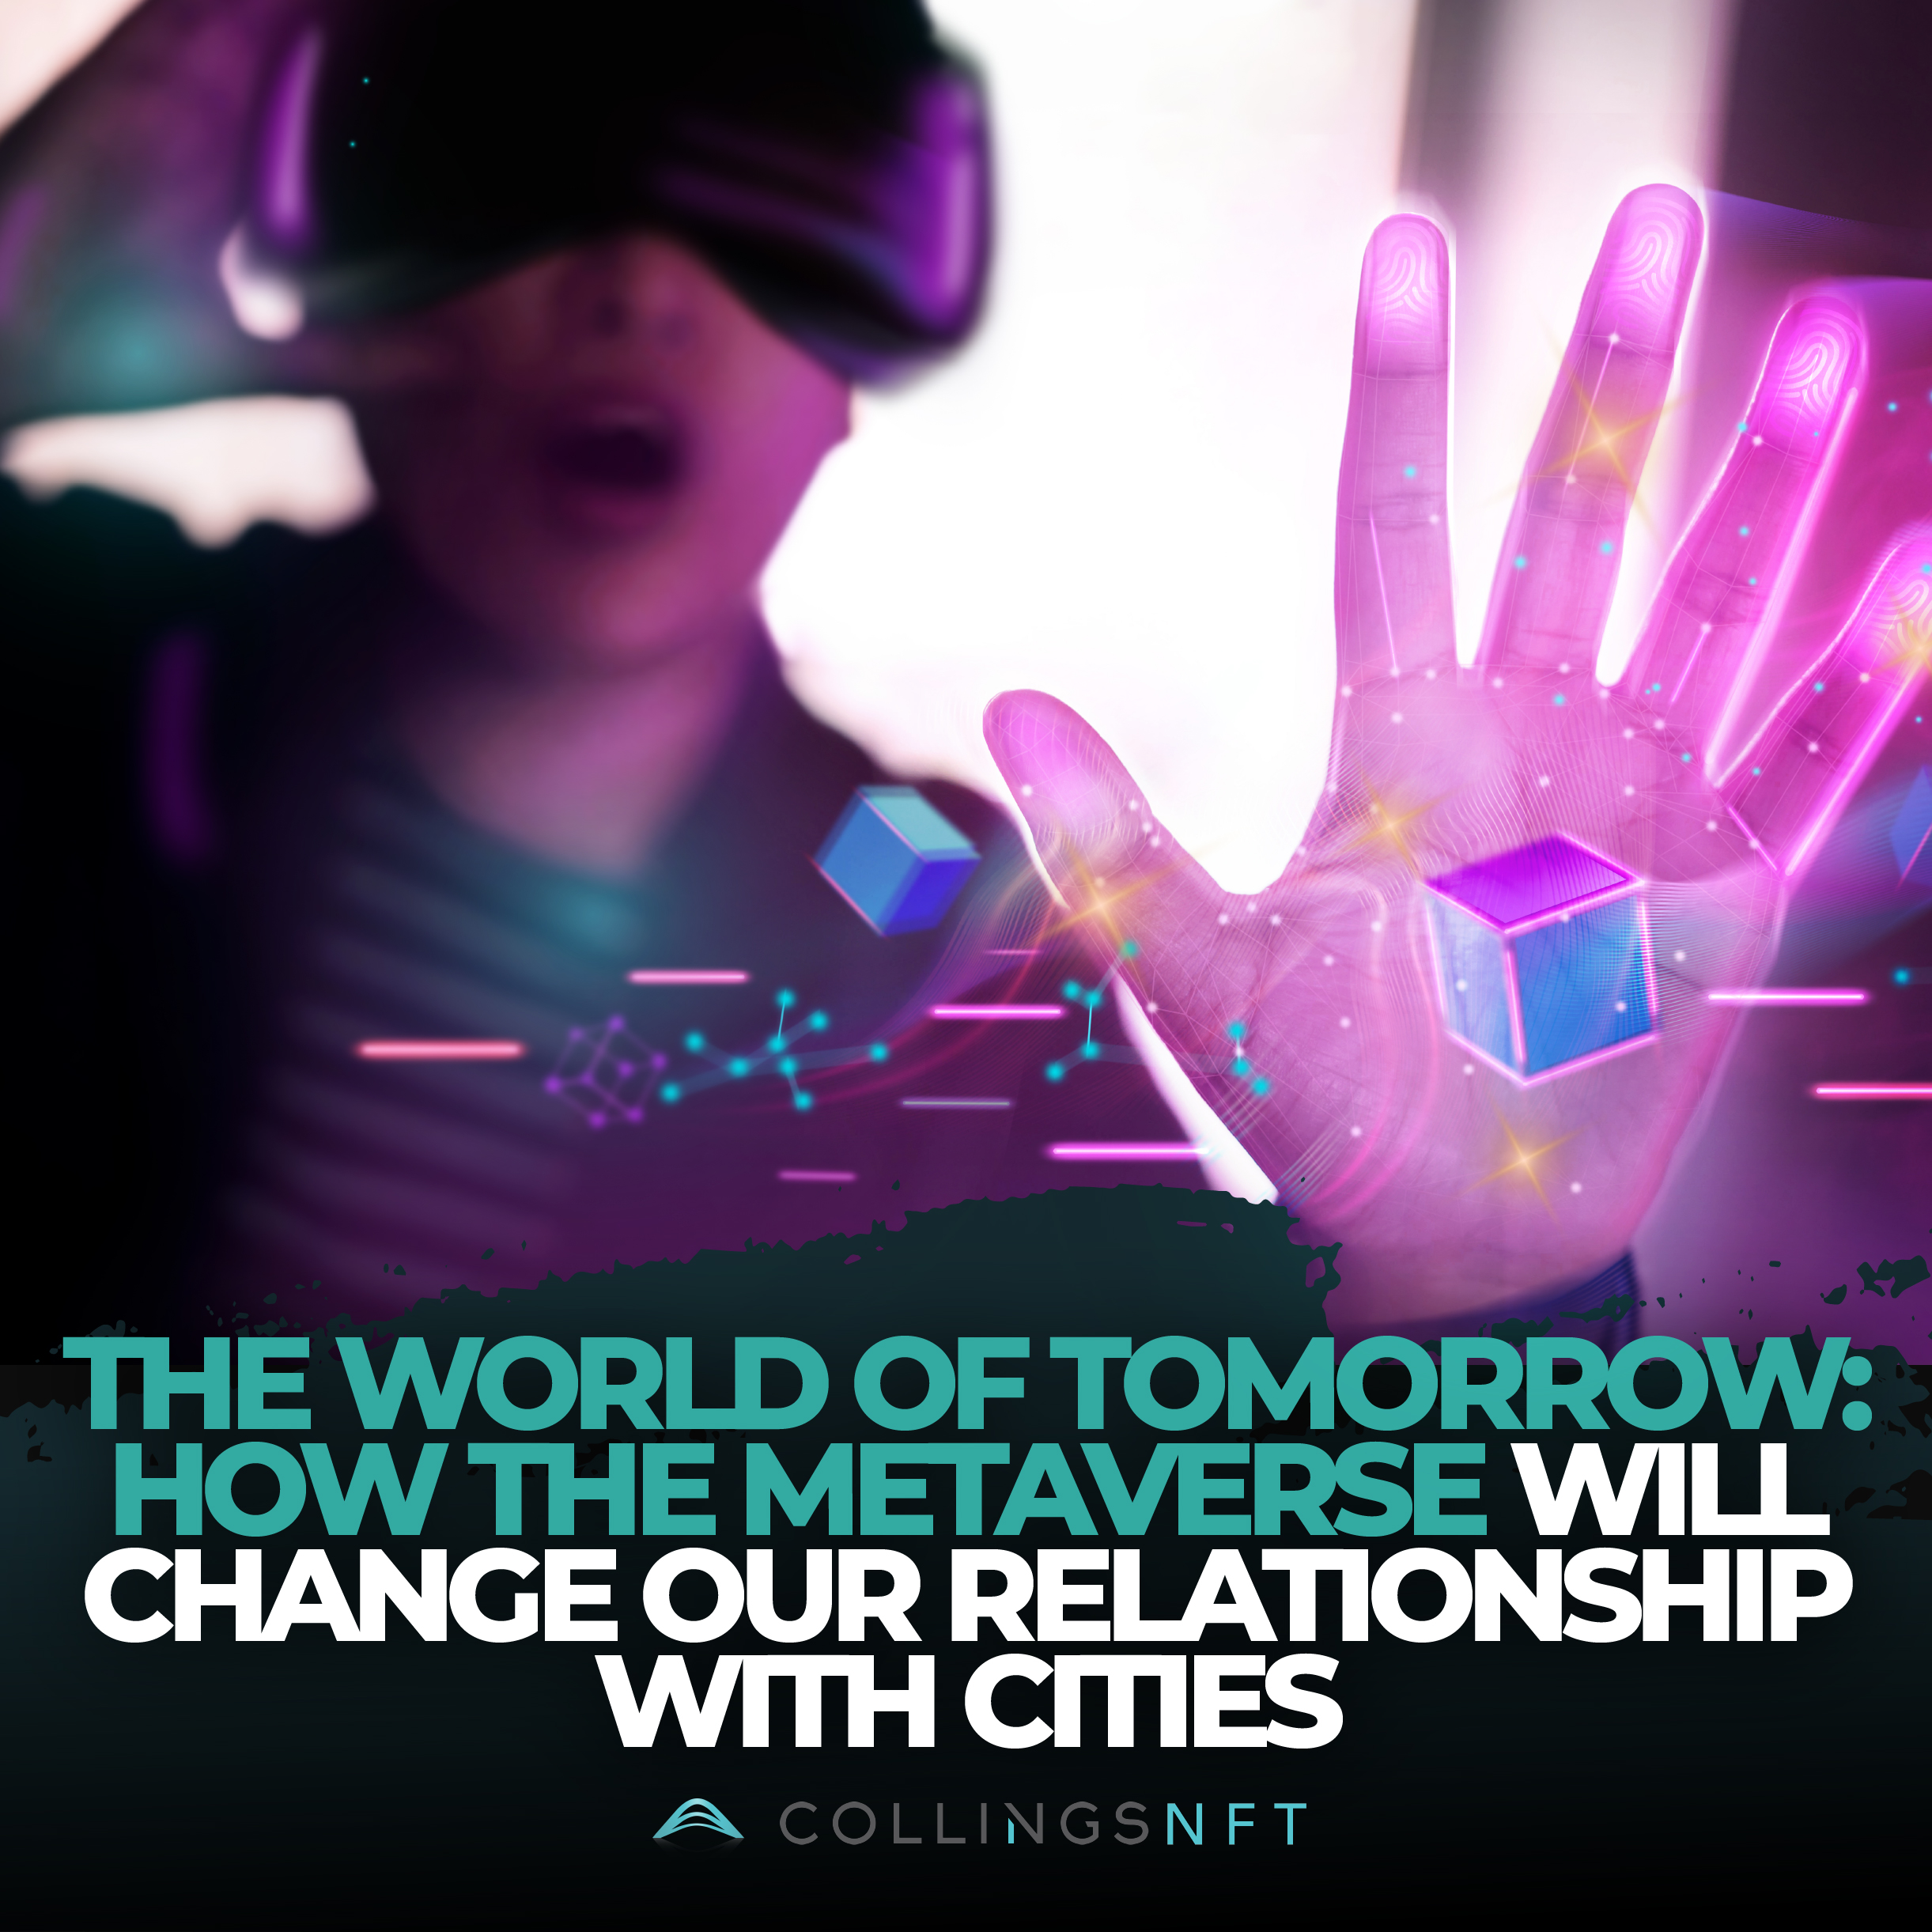 The World of Tomorrow: How the Metaverse will change our relationship with cities - Collings NFT